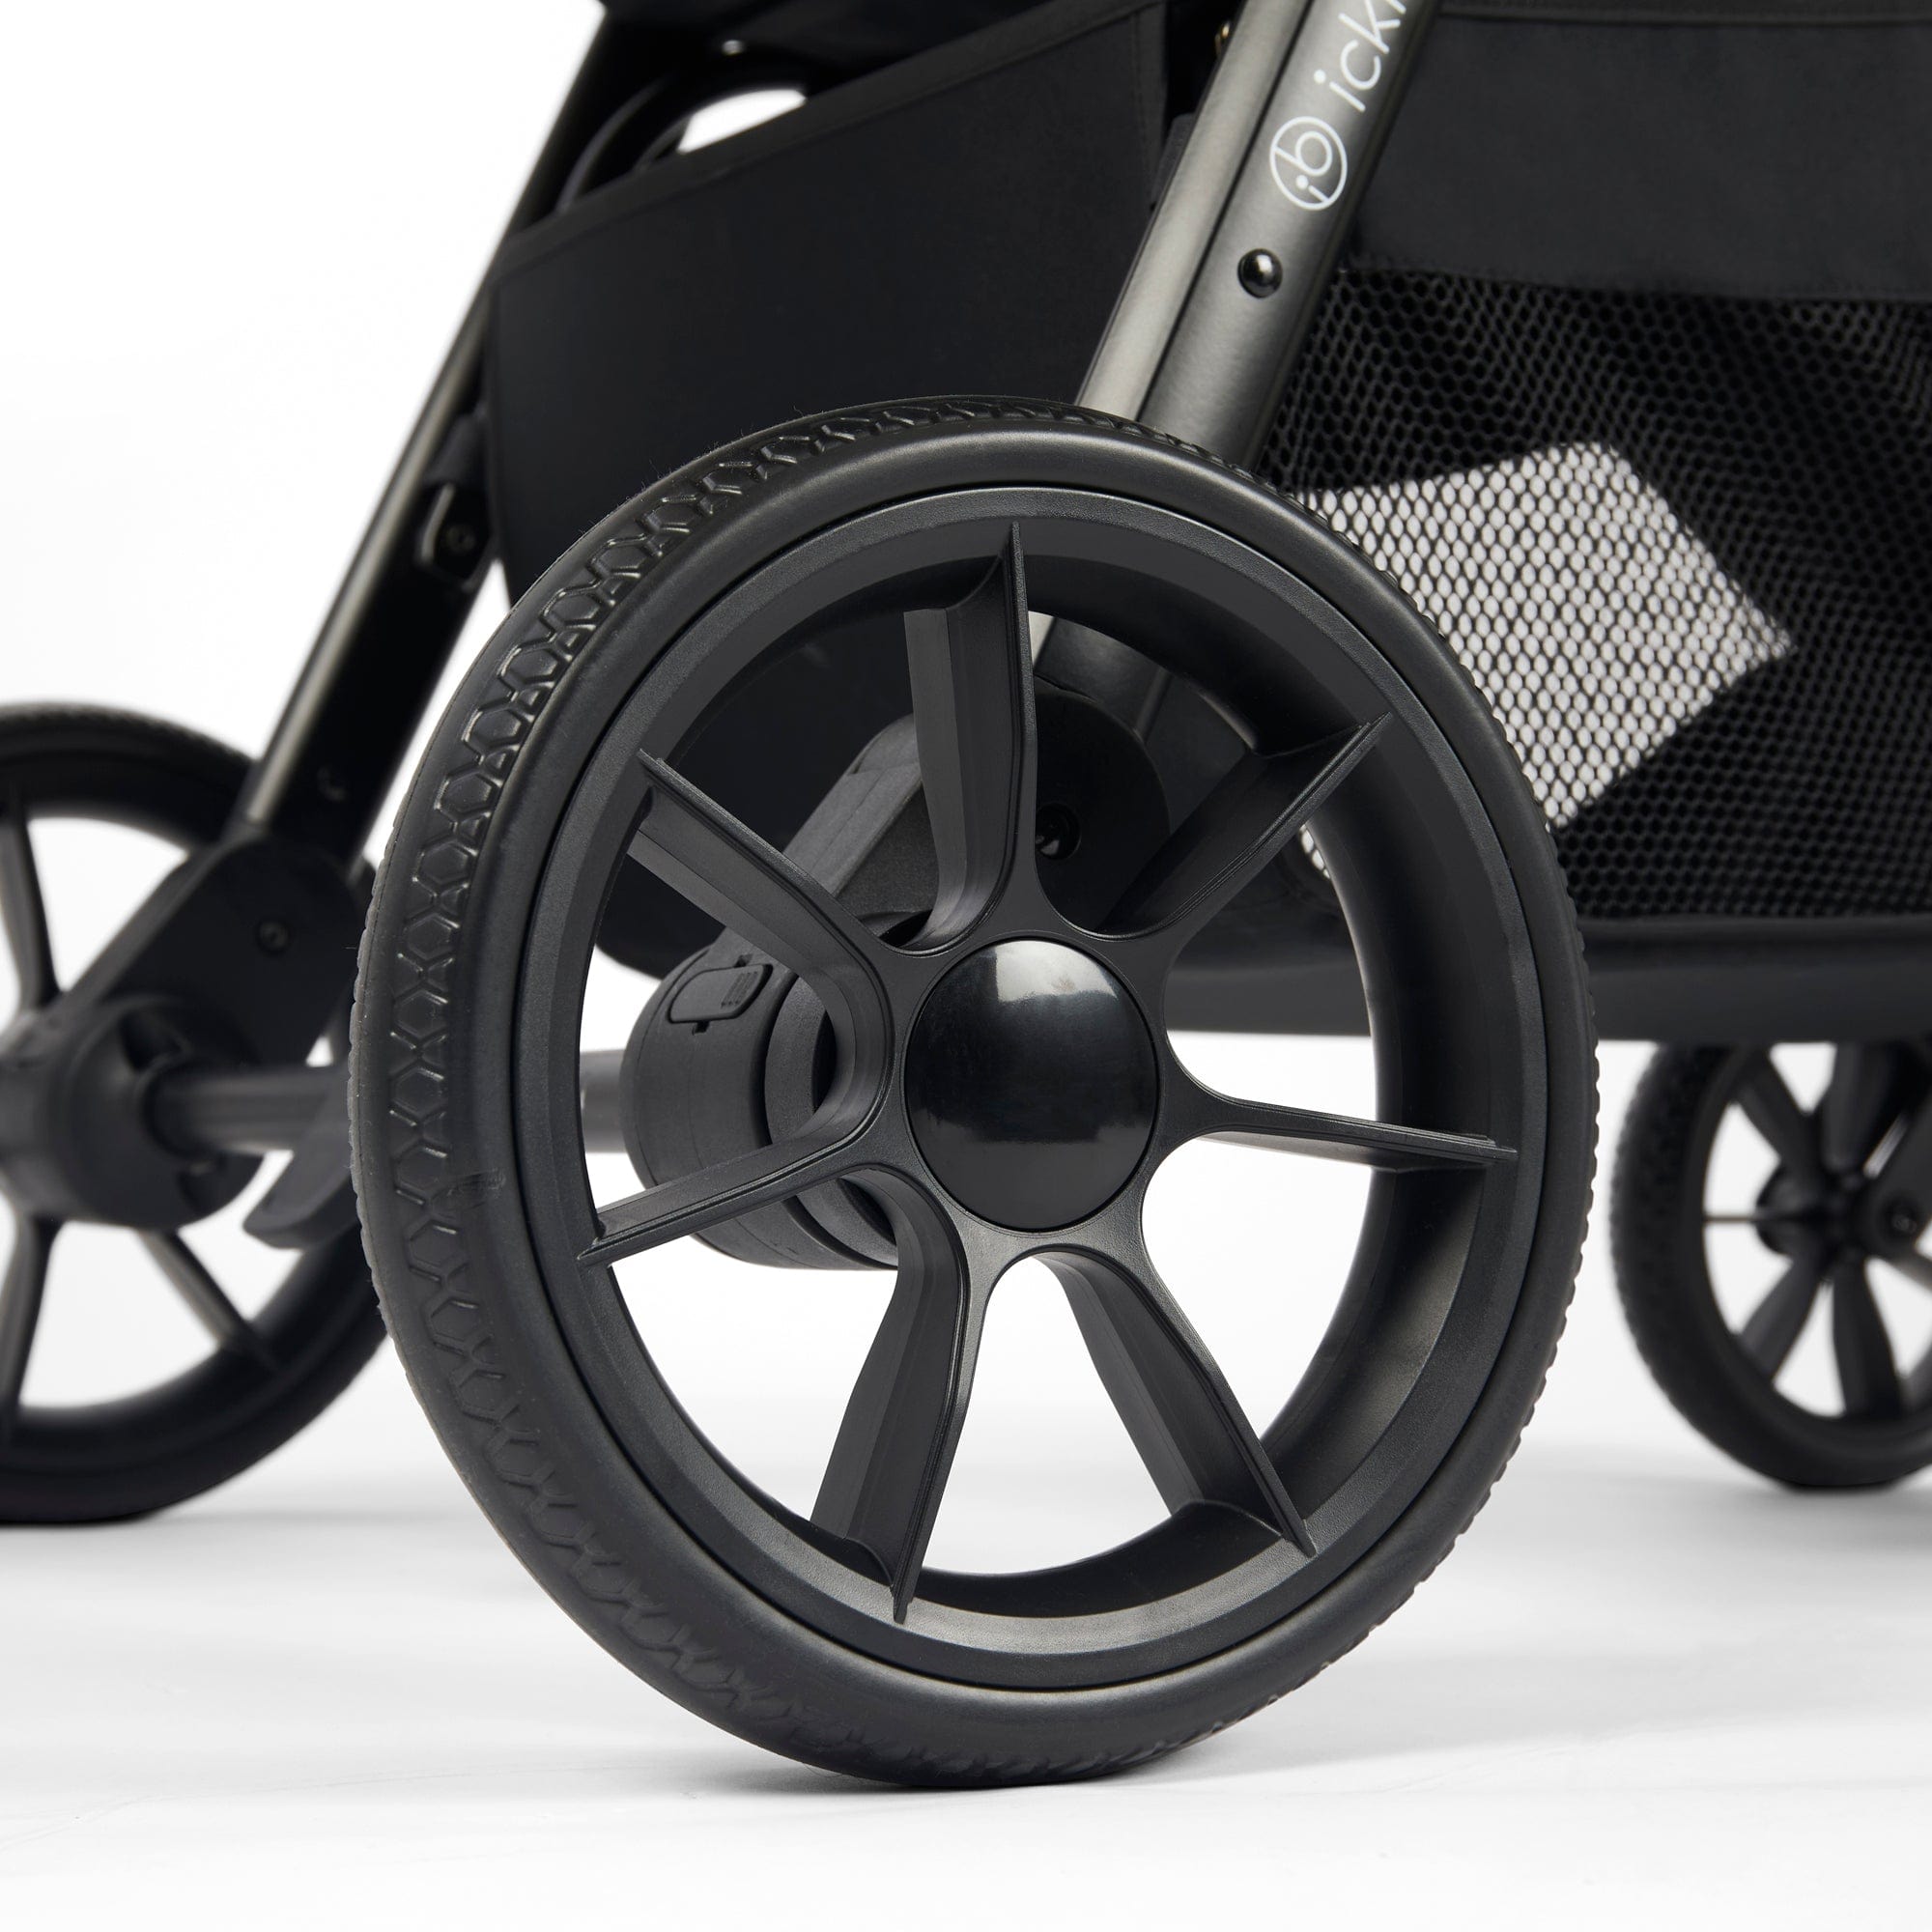 Ickle Bubba Pushchairs & Buggies STOMP STRIDE Pushchair in (Midnight) 15-006-100-038